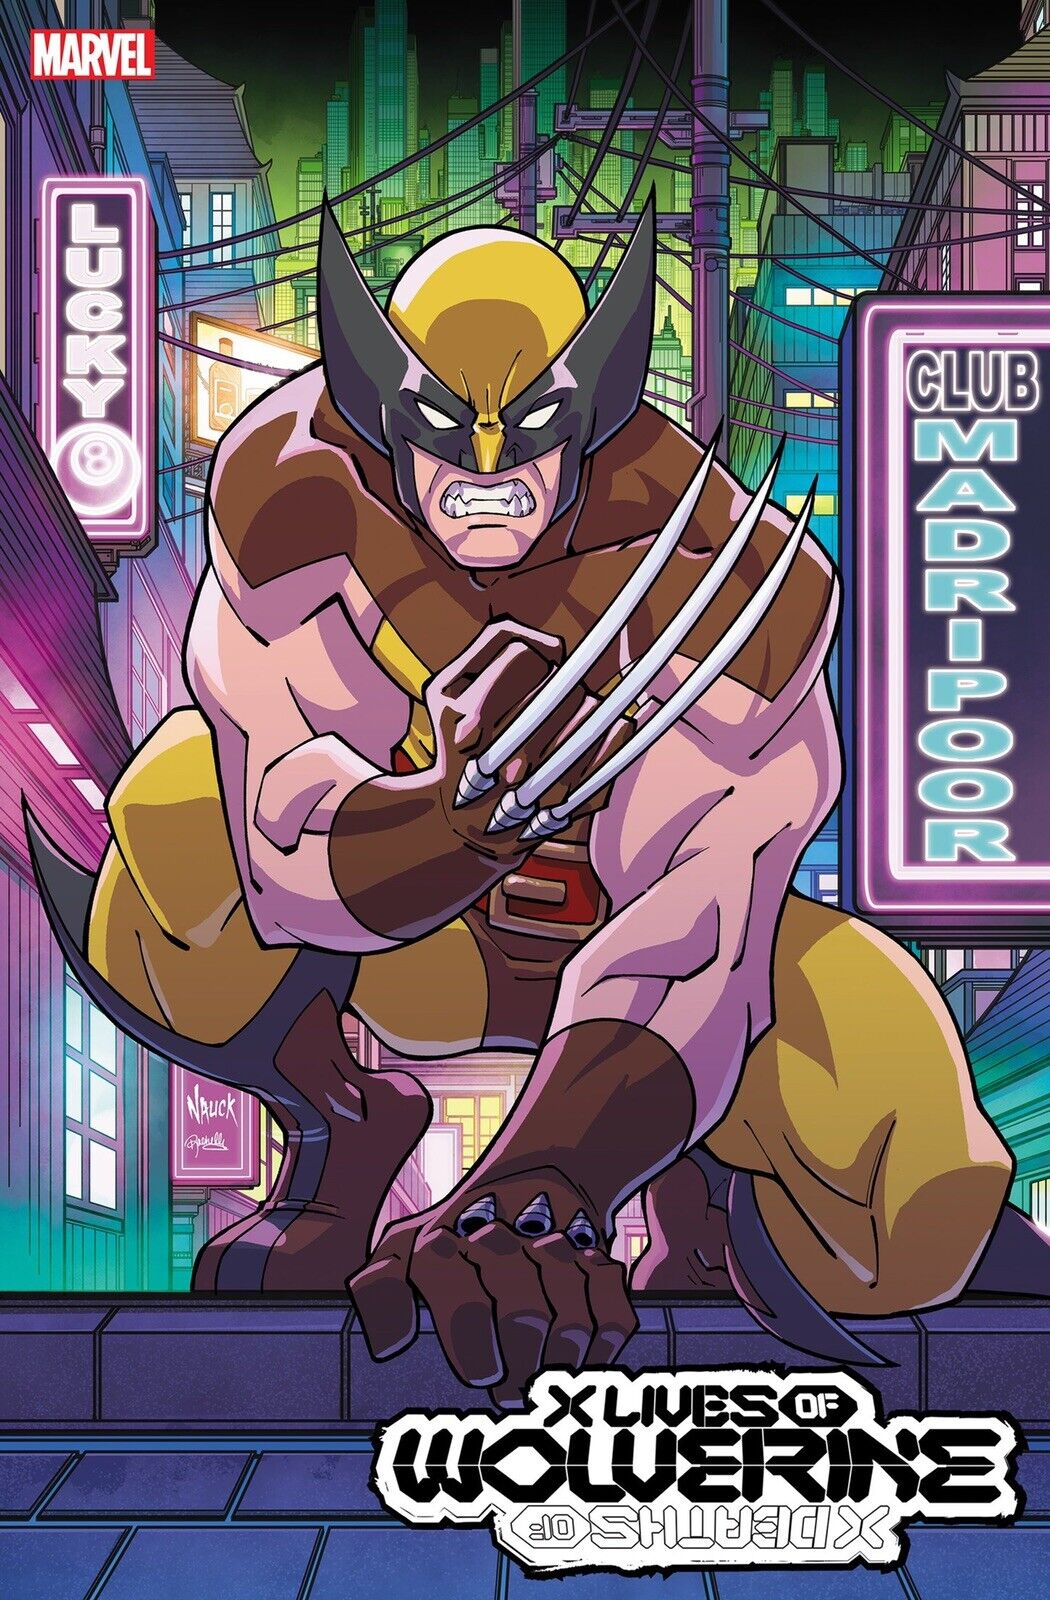 🚨💥 X LIVES OF WOLVERINE #1 TODD NAUCK 1:25 Animation Style Ratio Variant NM